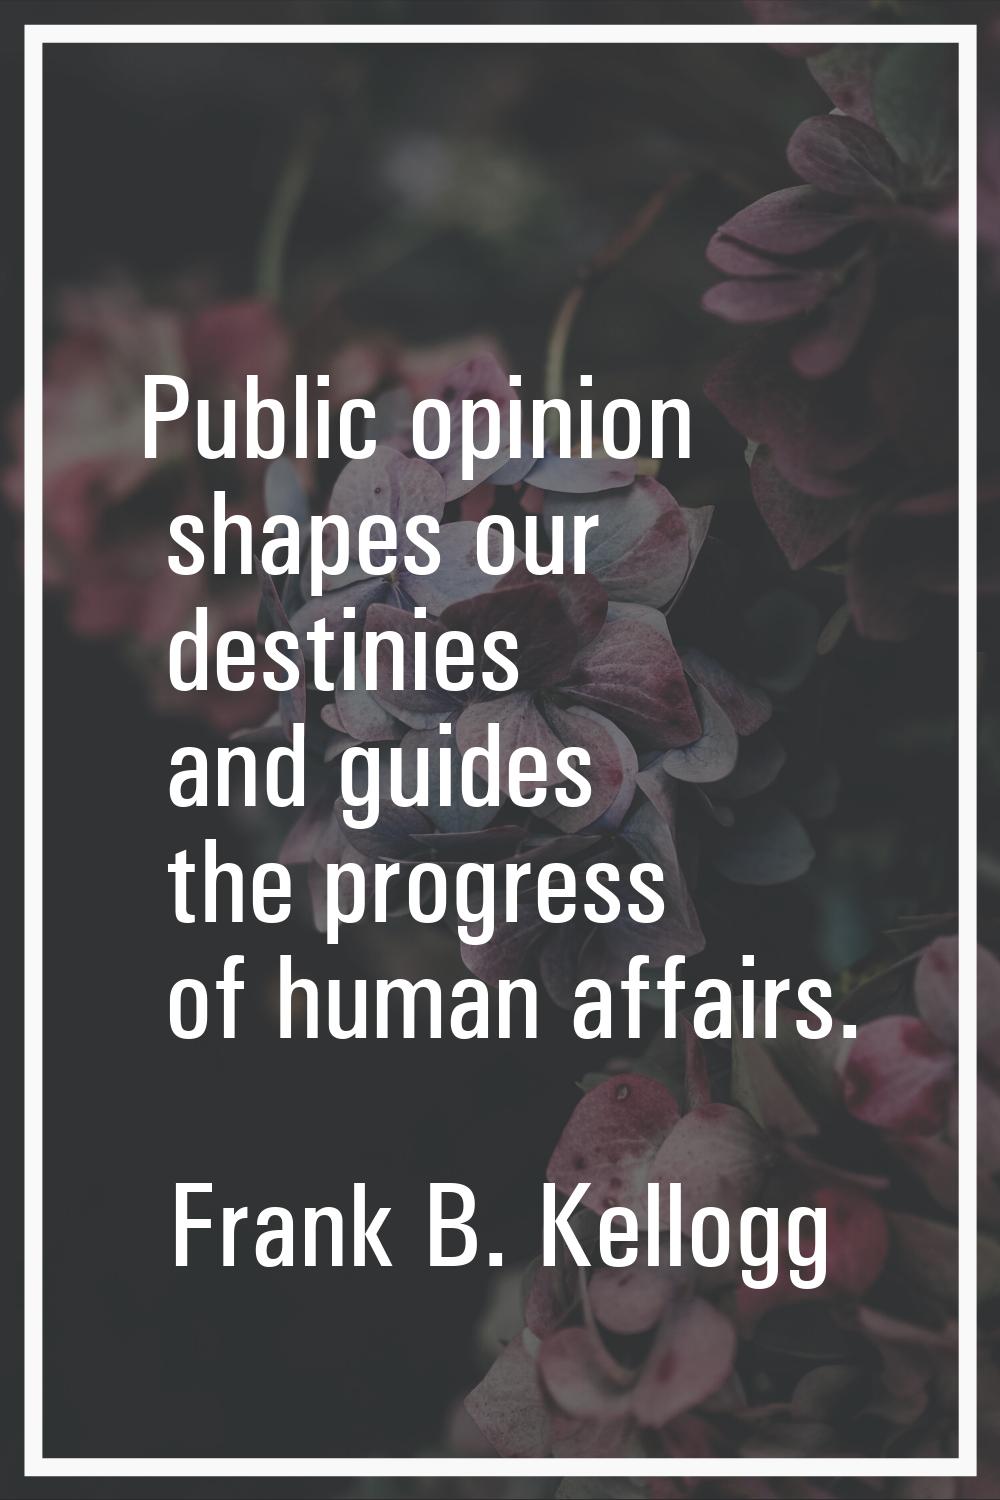 Public opinion shapes our destinies and guides the progress of human affairs.